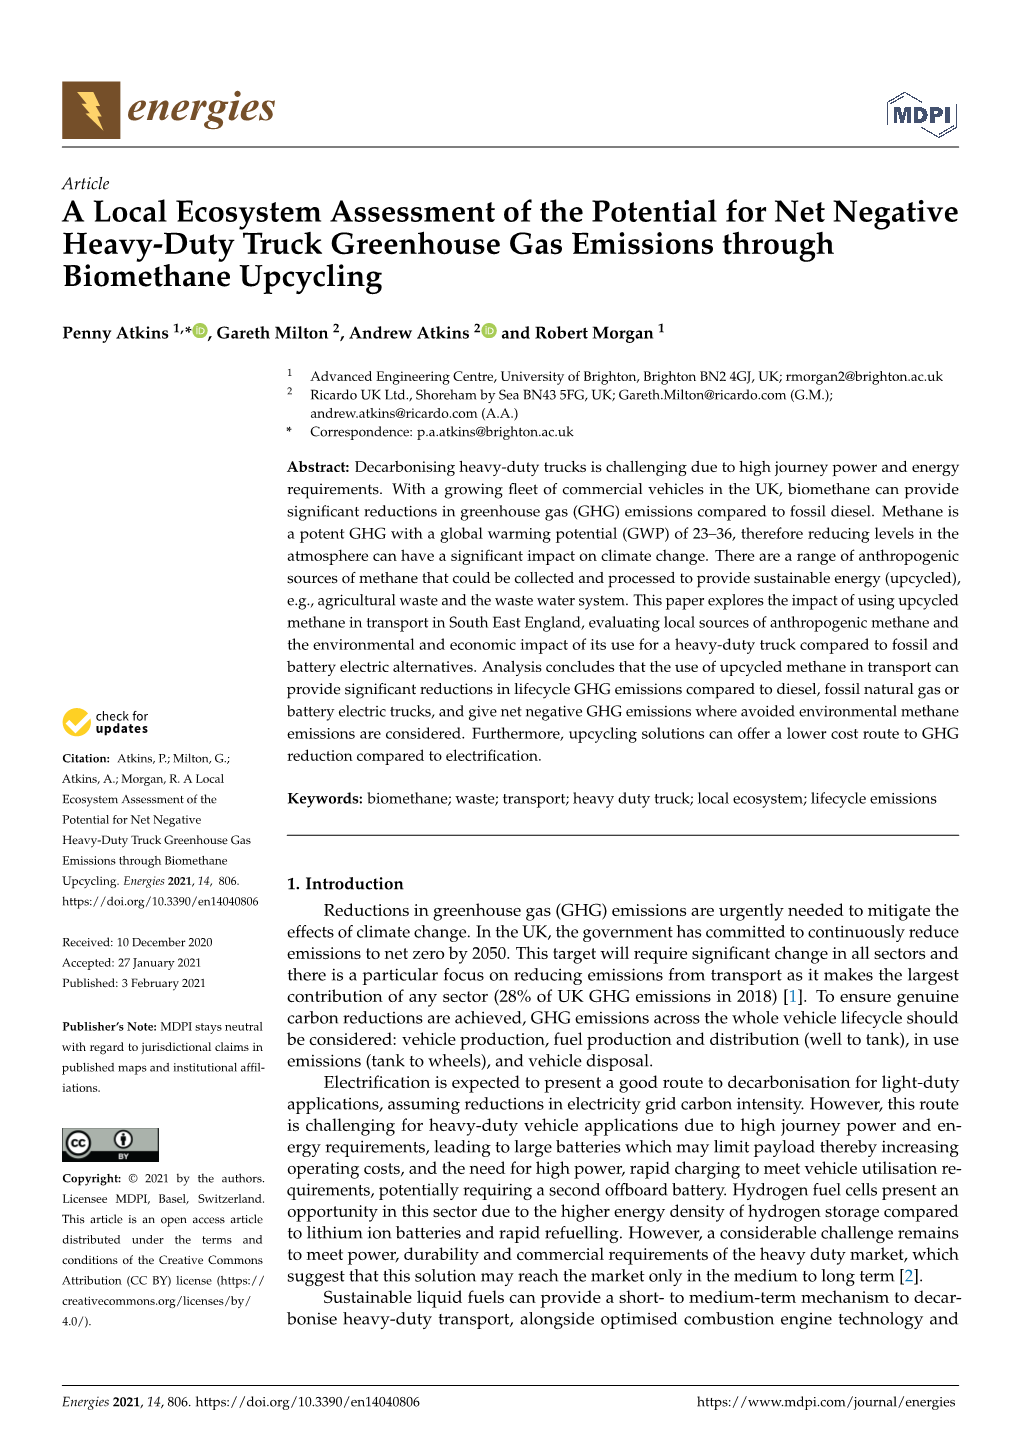 A Local Ecosystem Assessment of the Potential for Net Negative Heavy-Duty Truck Greenhouse Gas Emissions Through Biomethane Upcycling